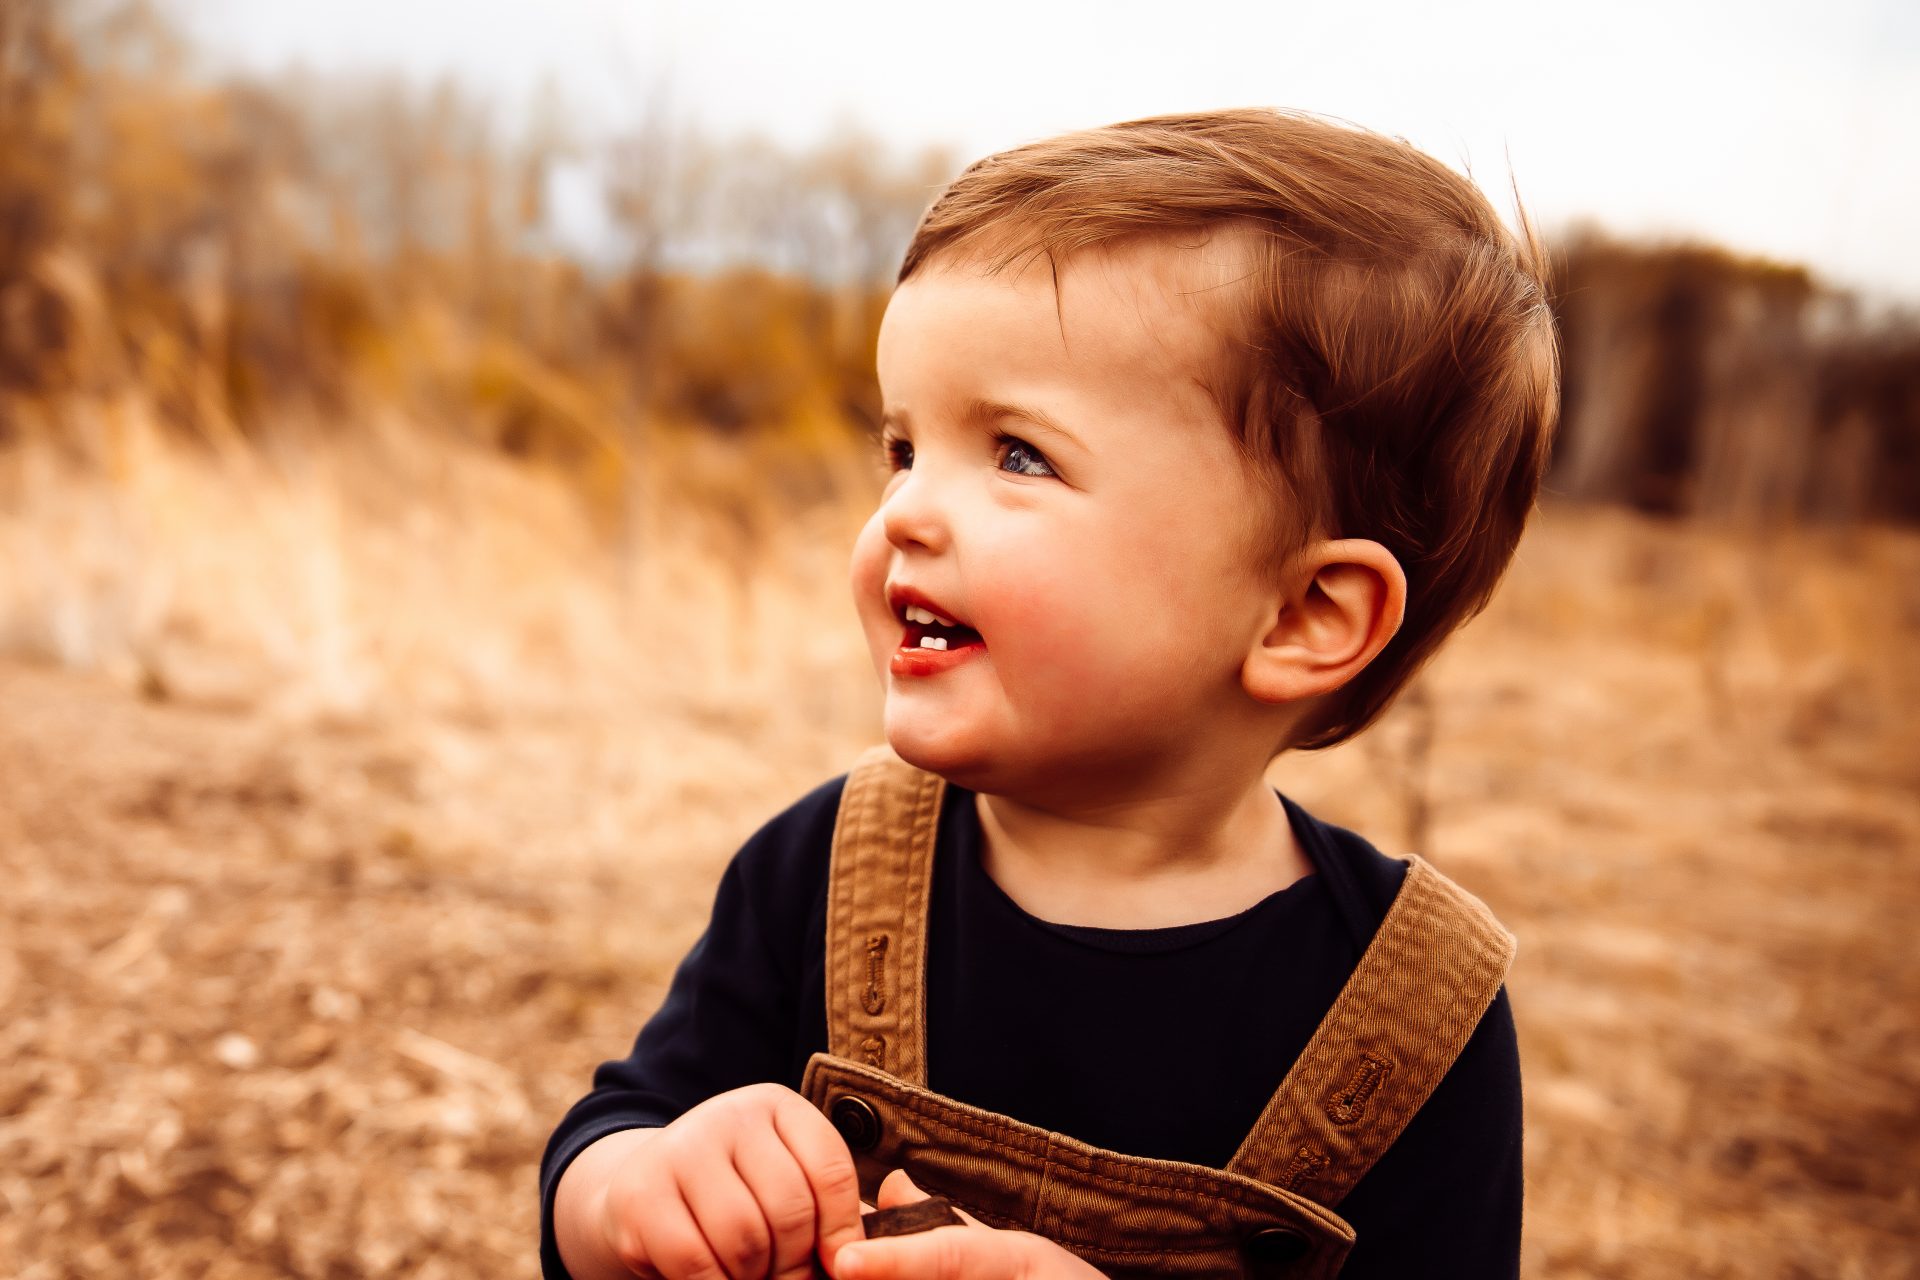 A joyful toddler in overalls smiles with a sense of wonder amidst an autumn landscape, embodying the spirit of inclusion found within a children's book about disabilities.